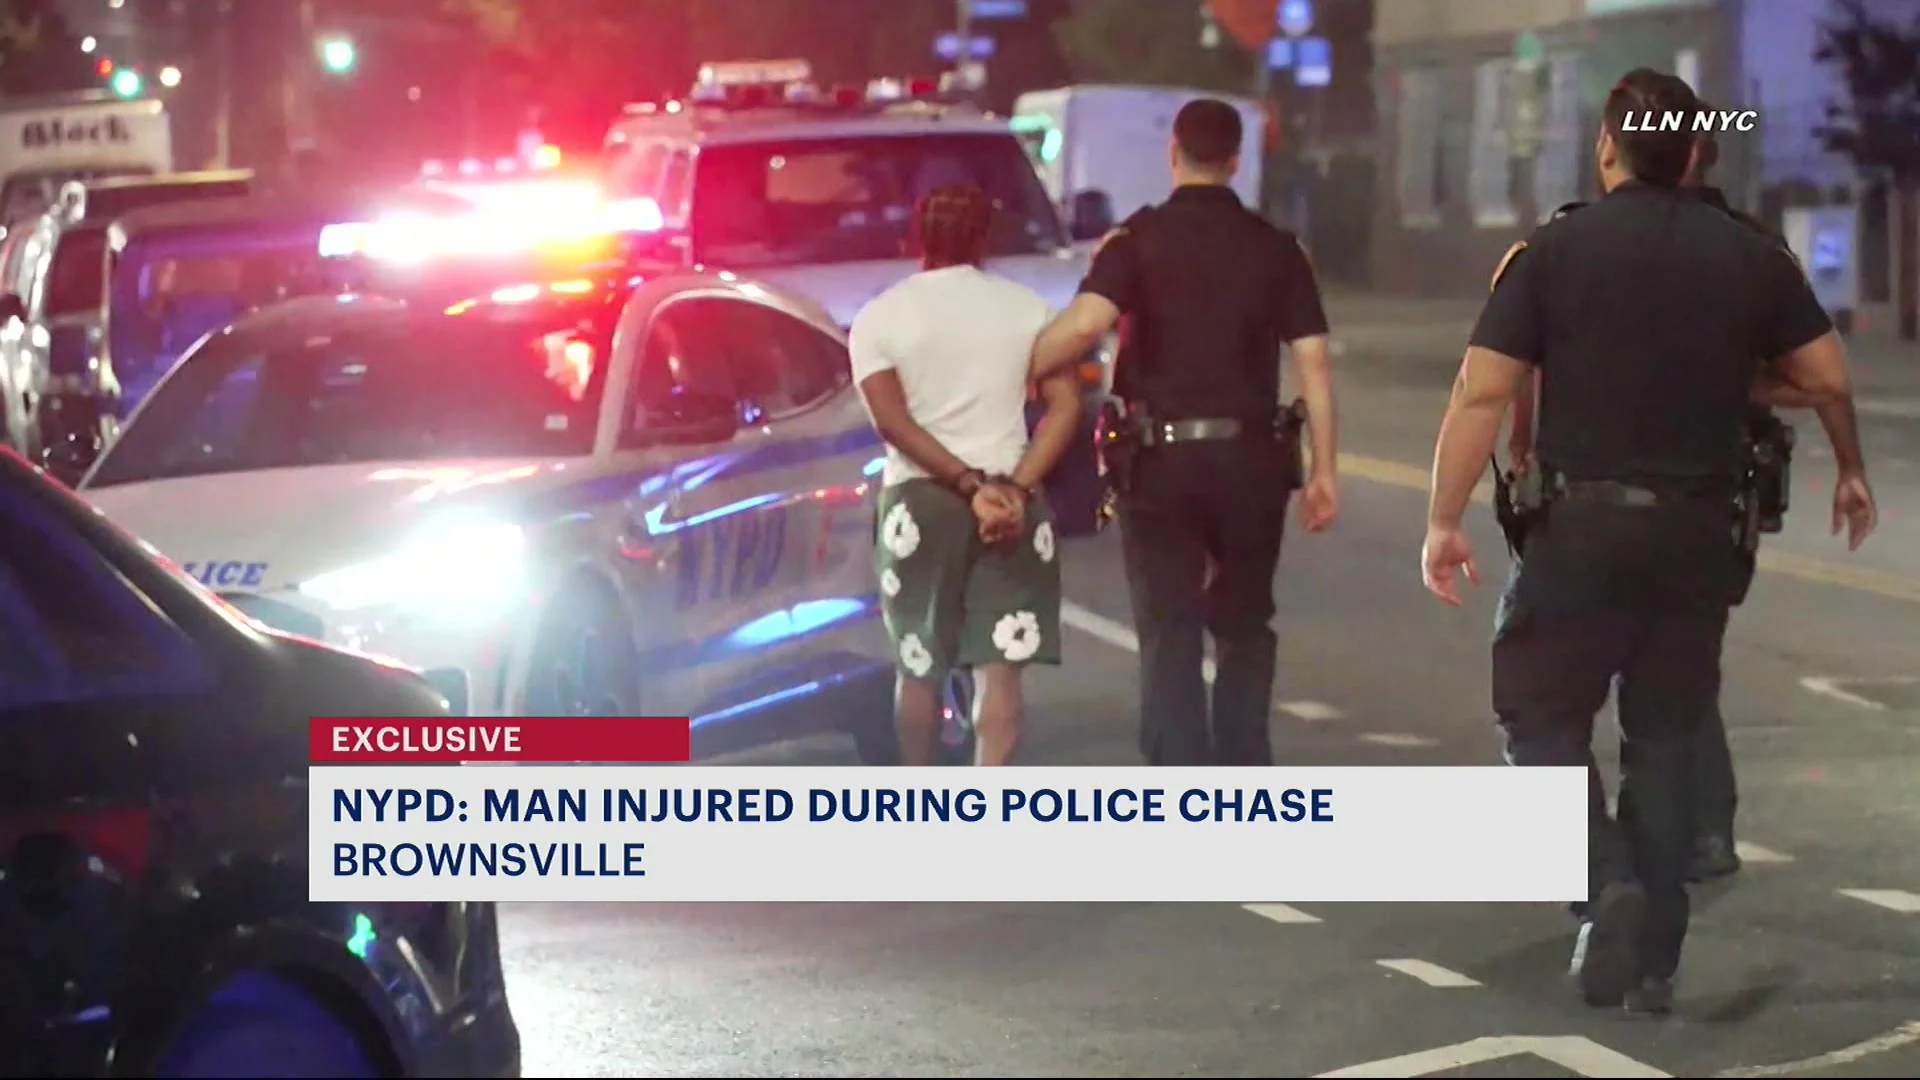 NYPD: Armed man struck by unmarked police vehicle in Brownsville